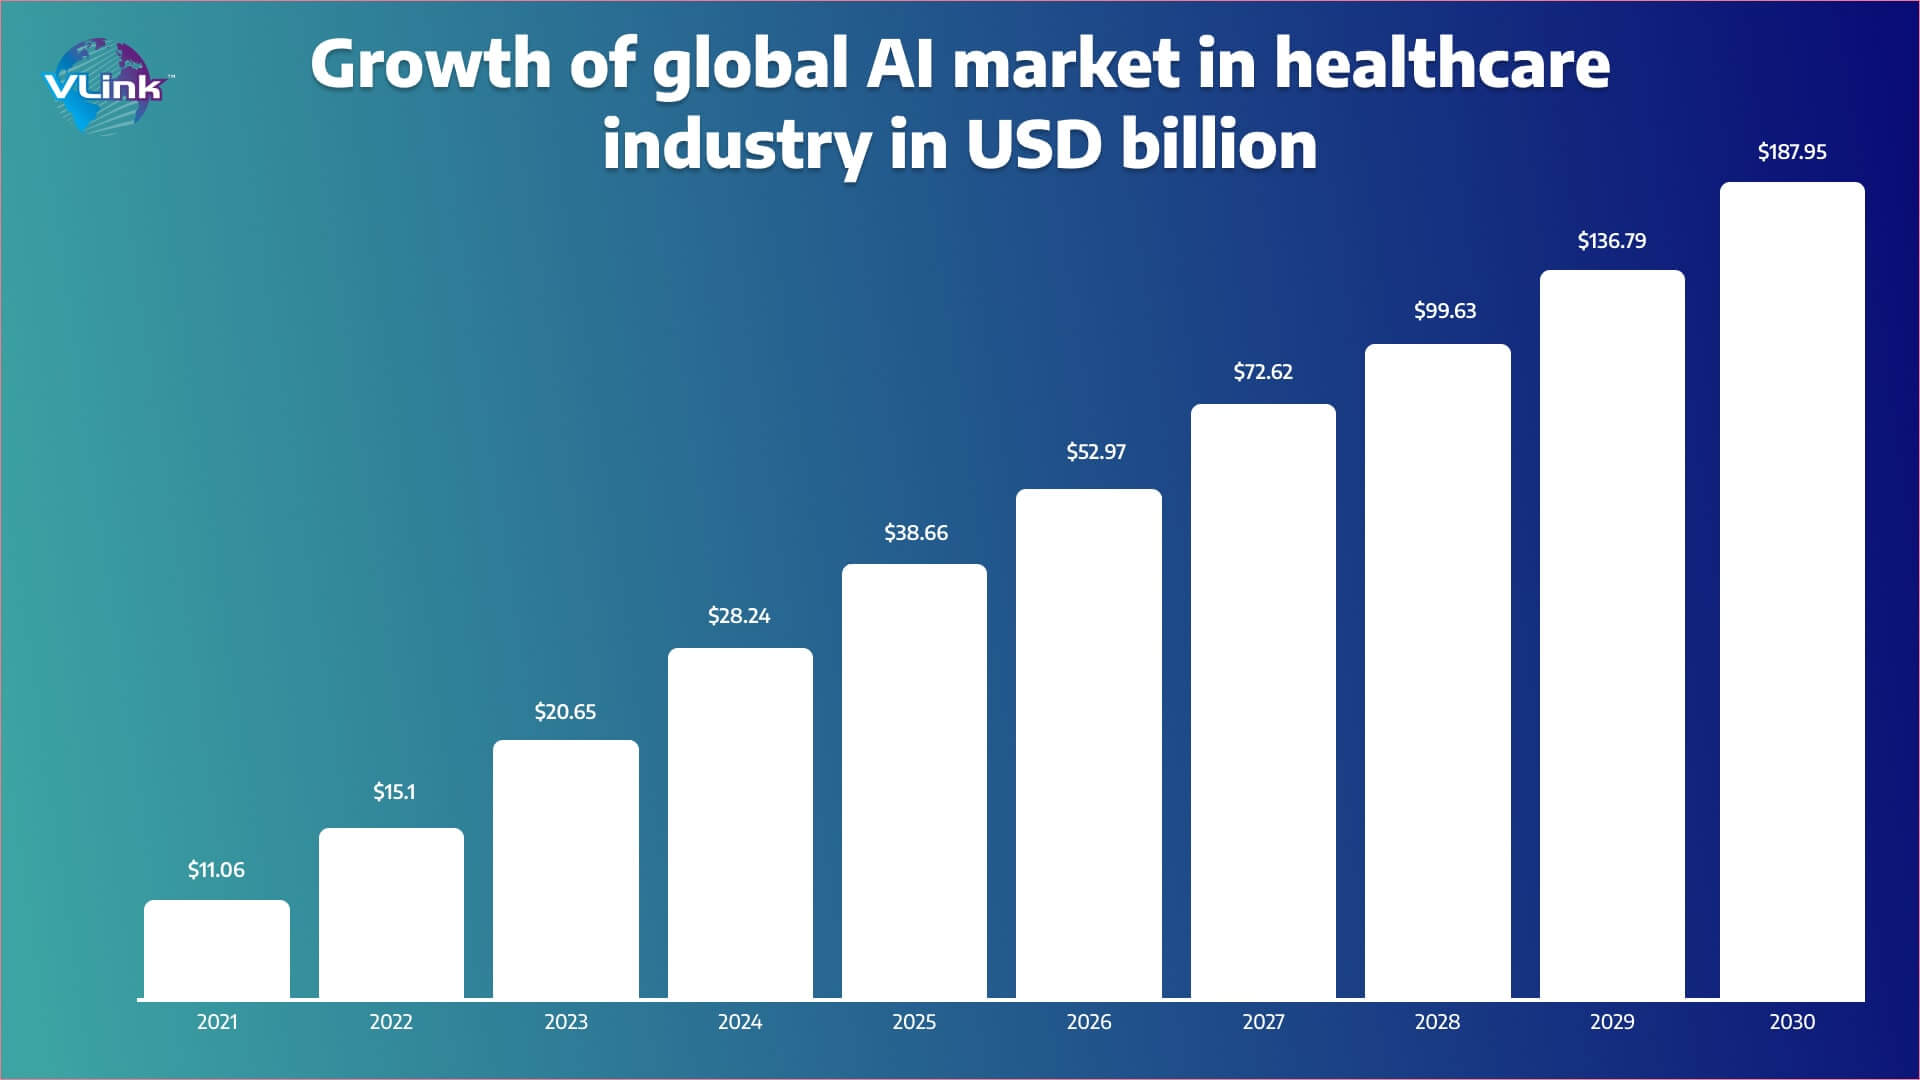 Growth of global AI market in healthcare industry in USD billion